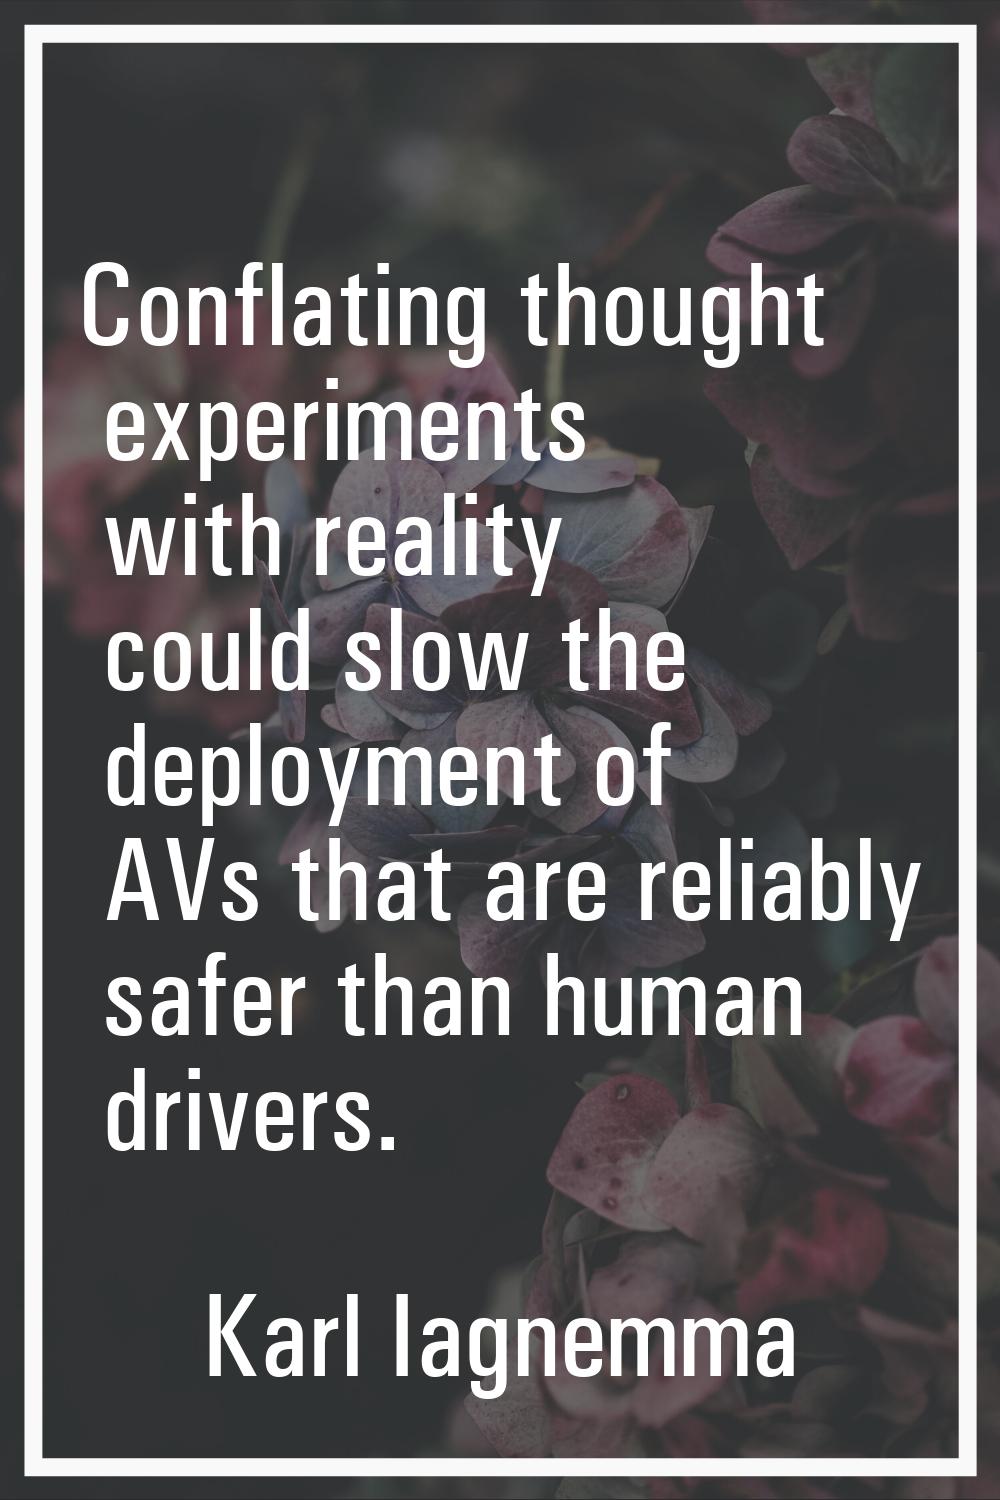 Conflating thought experiments with reality could slow the deployment of AVs that are reliably safe